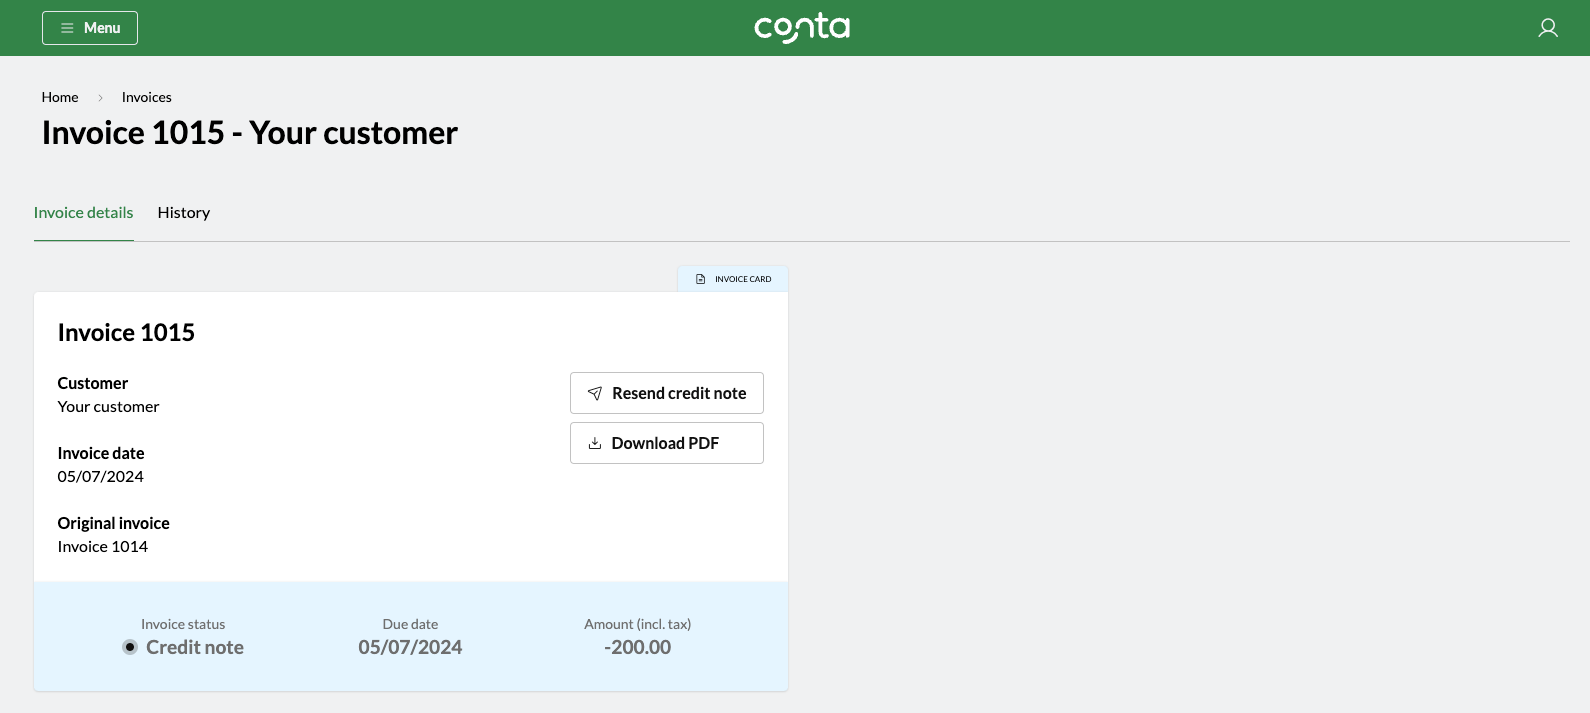 The credit note view in Conta, where you can resend the credit note or download a PDF.